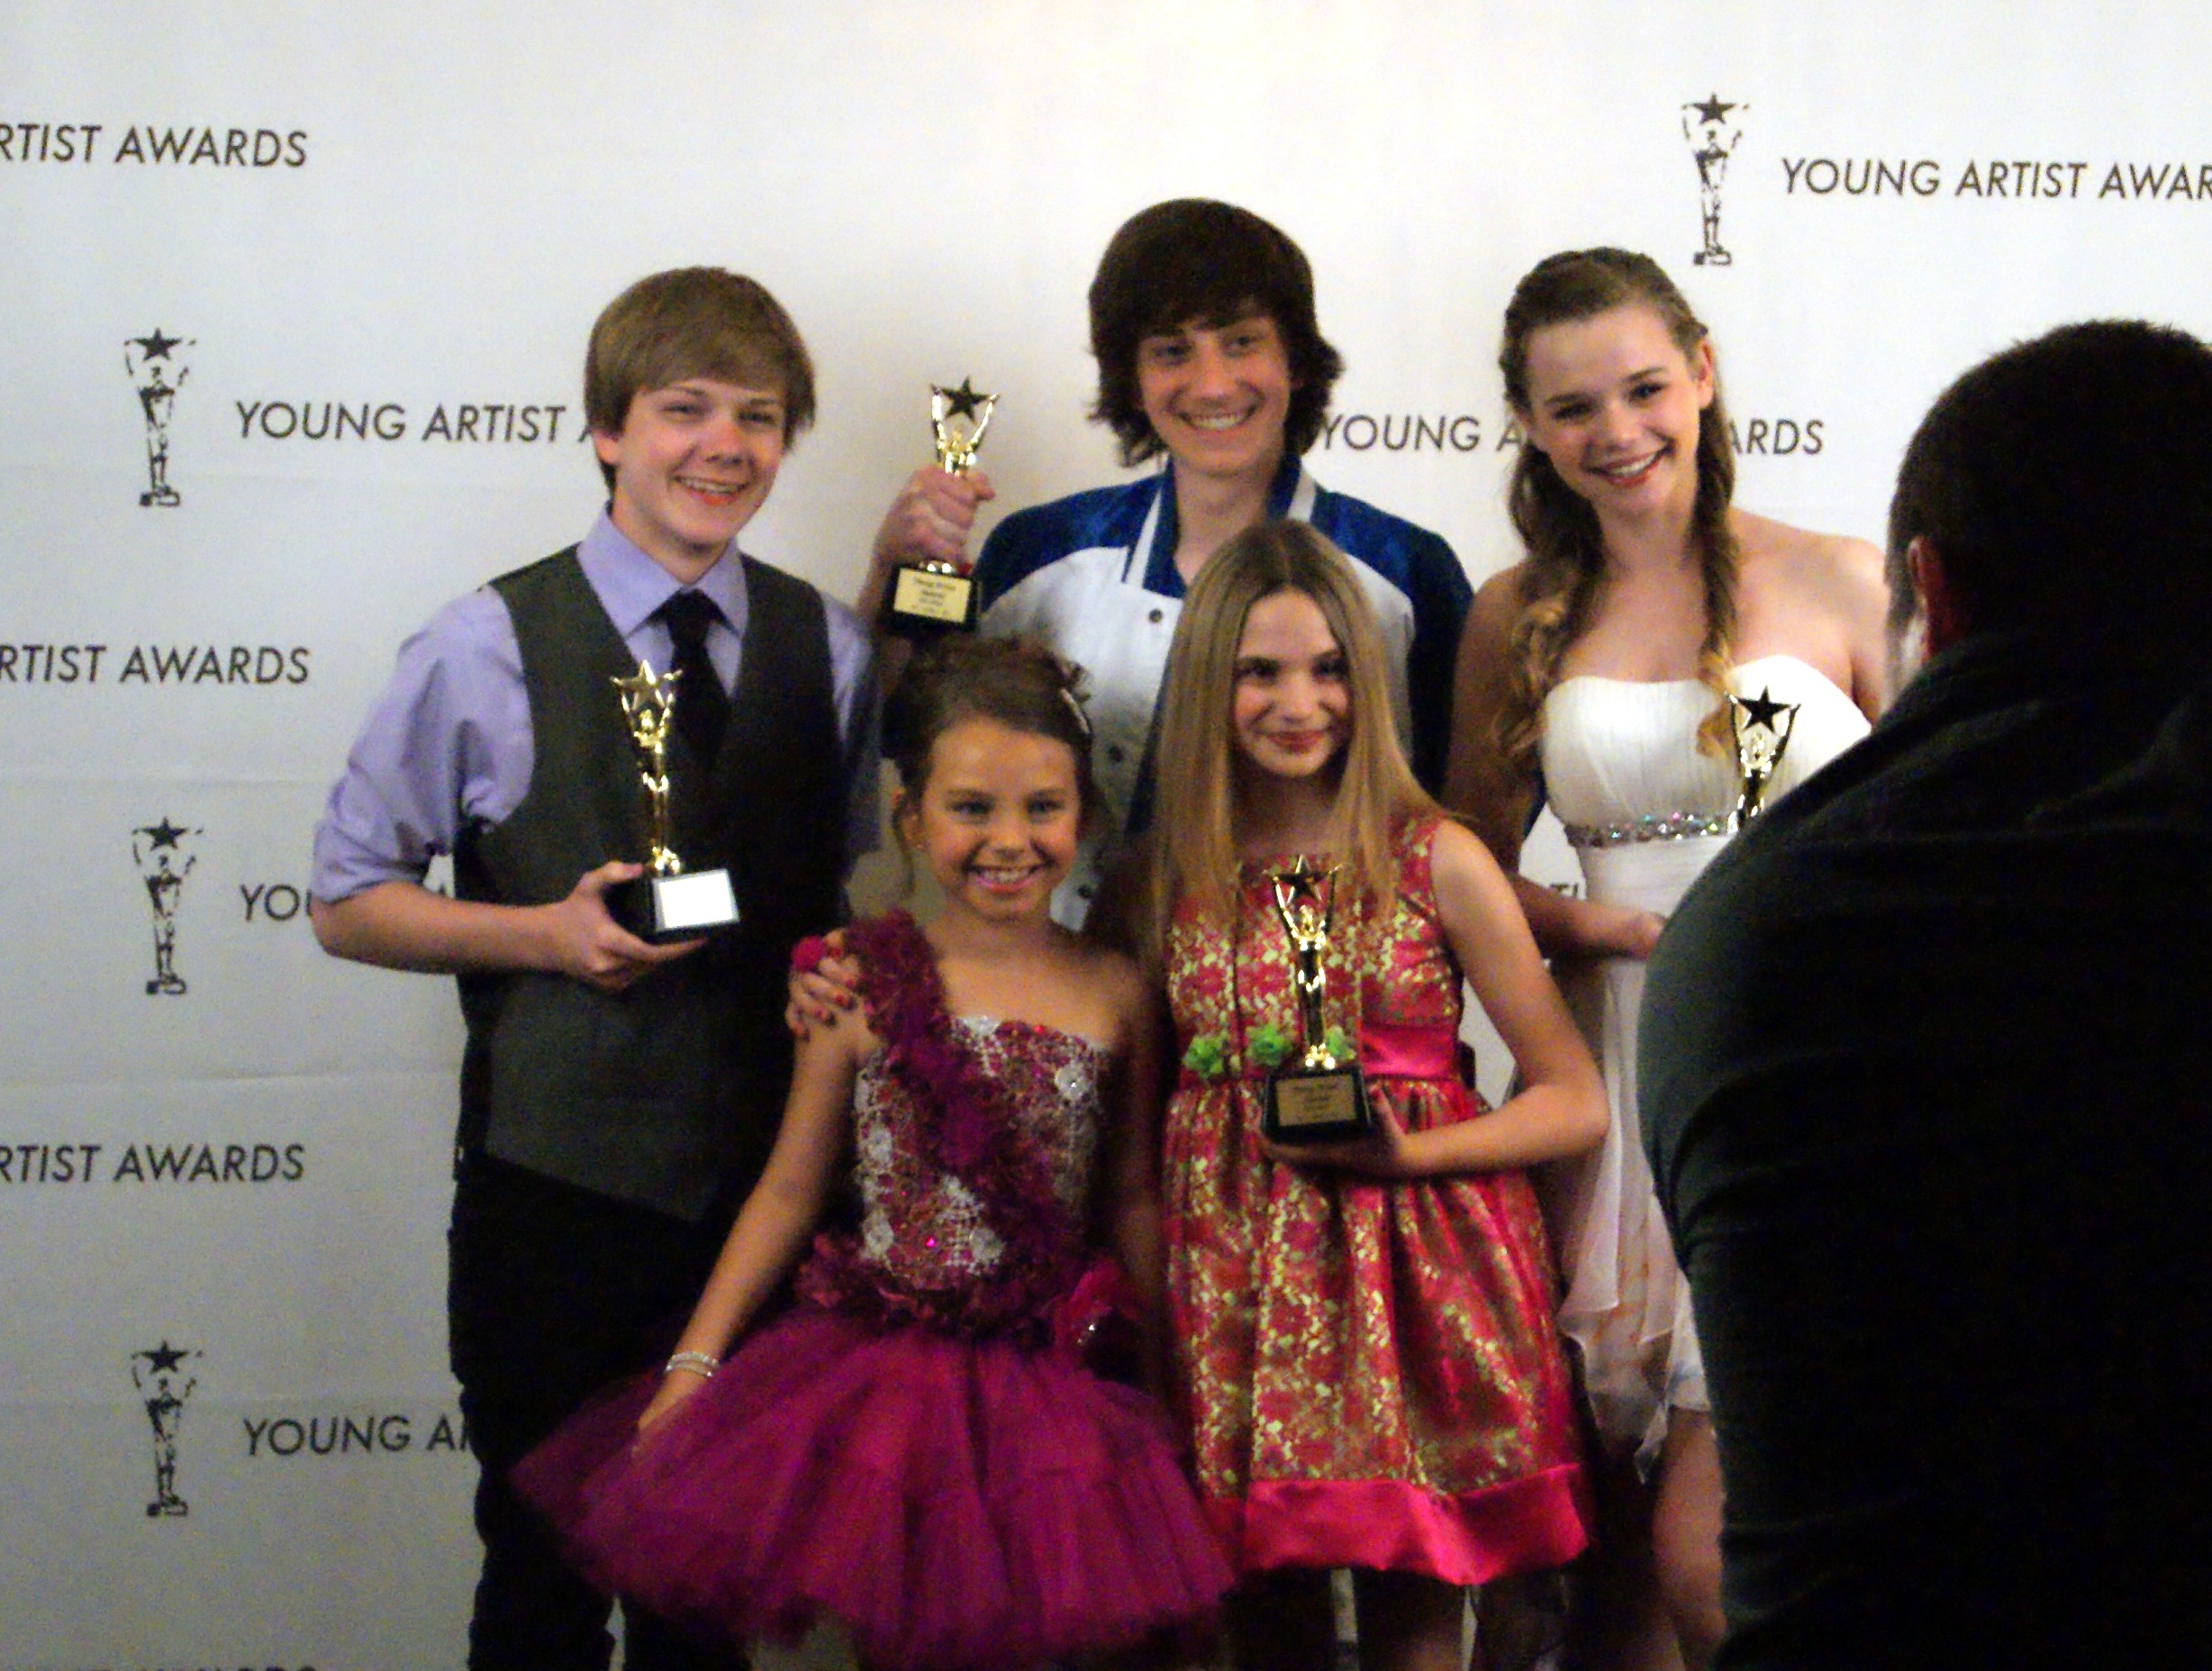 Austin with the cast of DEBRA! He was nominated in 3 categories and won one at the 33rd Young Artists Awards